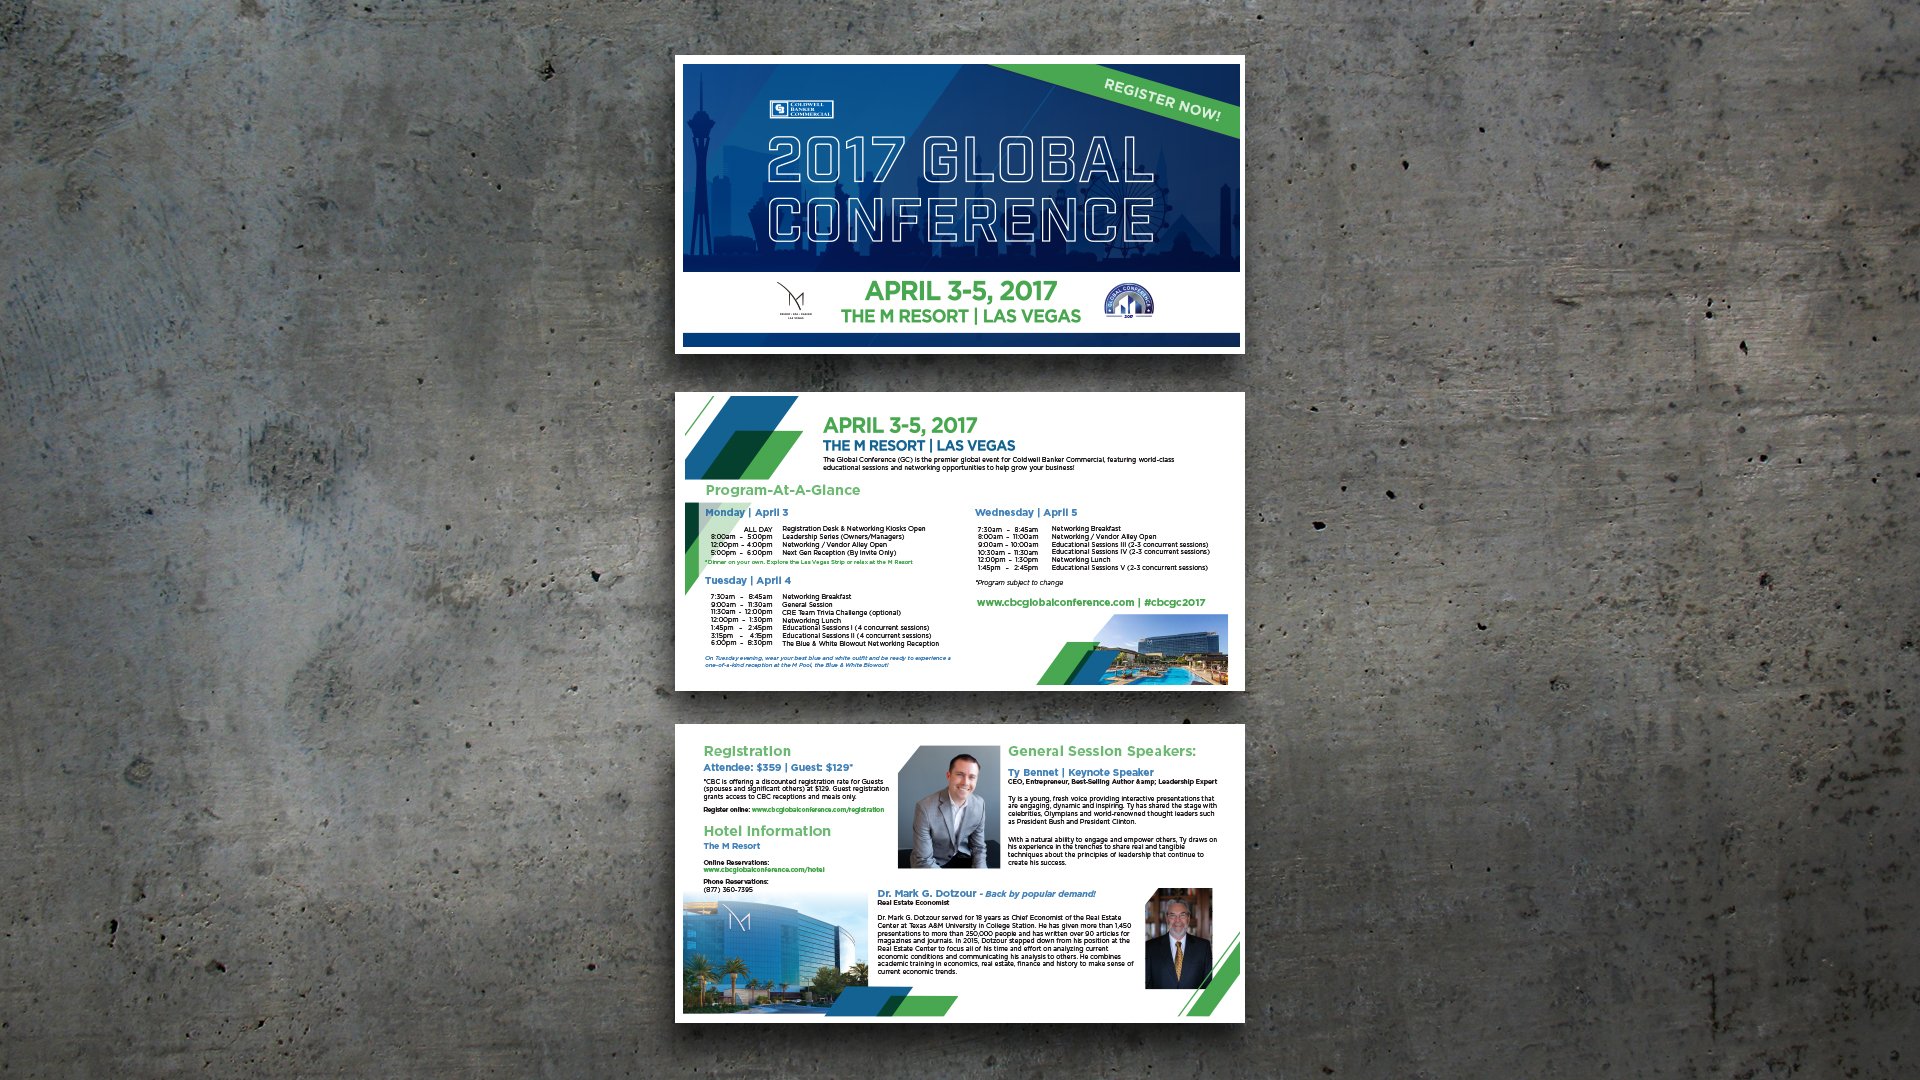 Conference Branding – CBC Annual Conference 2017